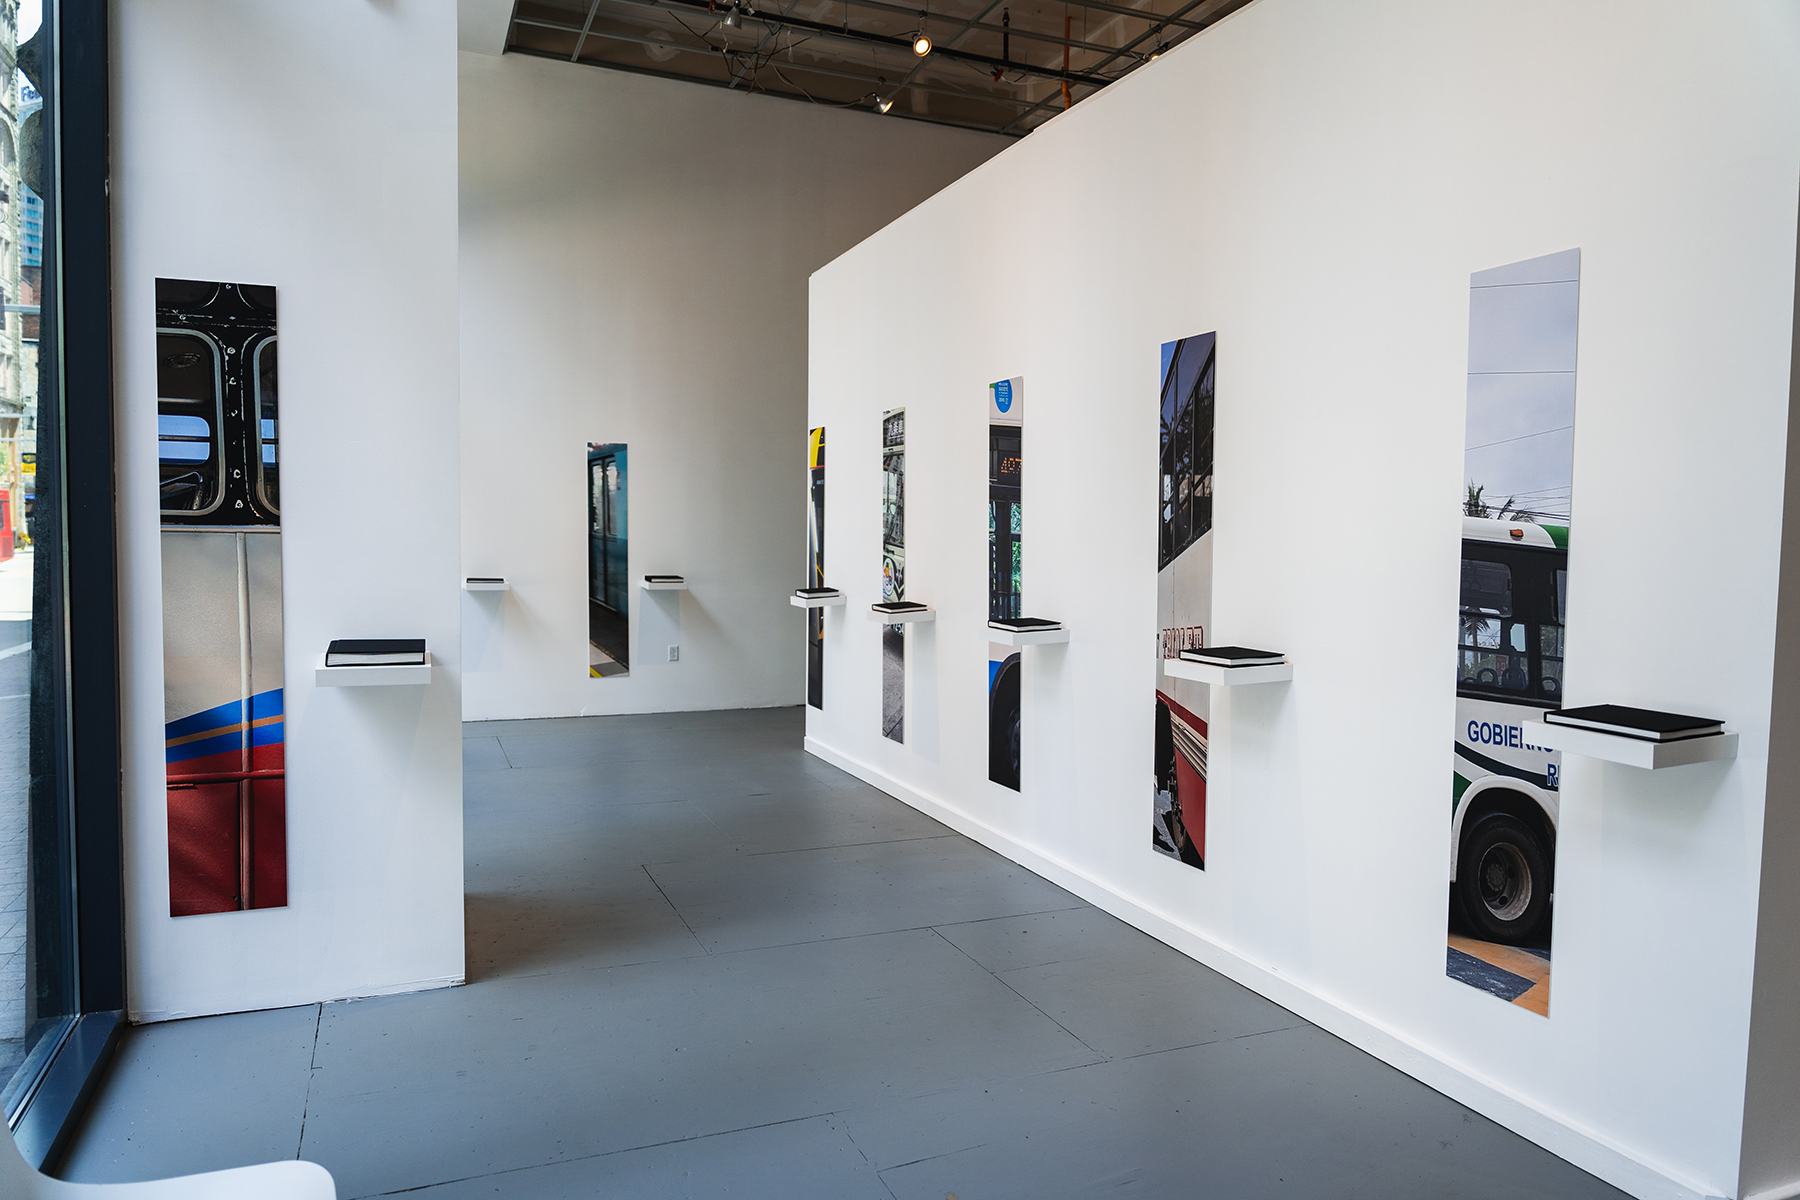 a gallery wall with tall, slim slivers of photographs hung next to small ledges. on each ledge is a black book.